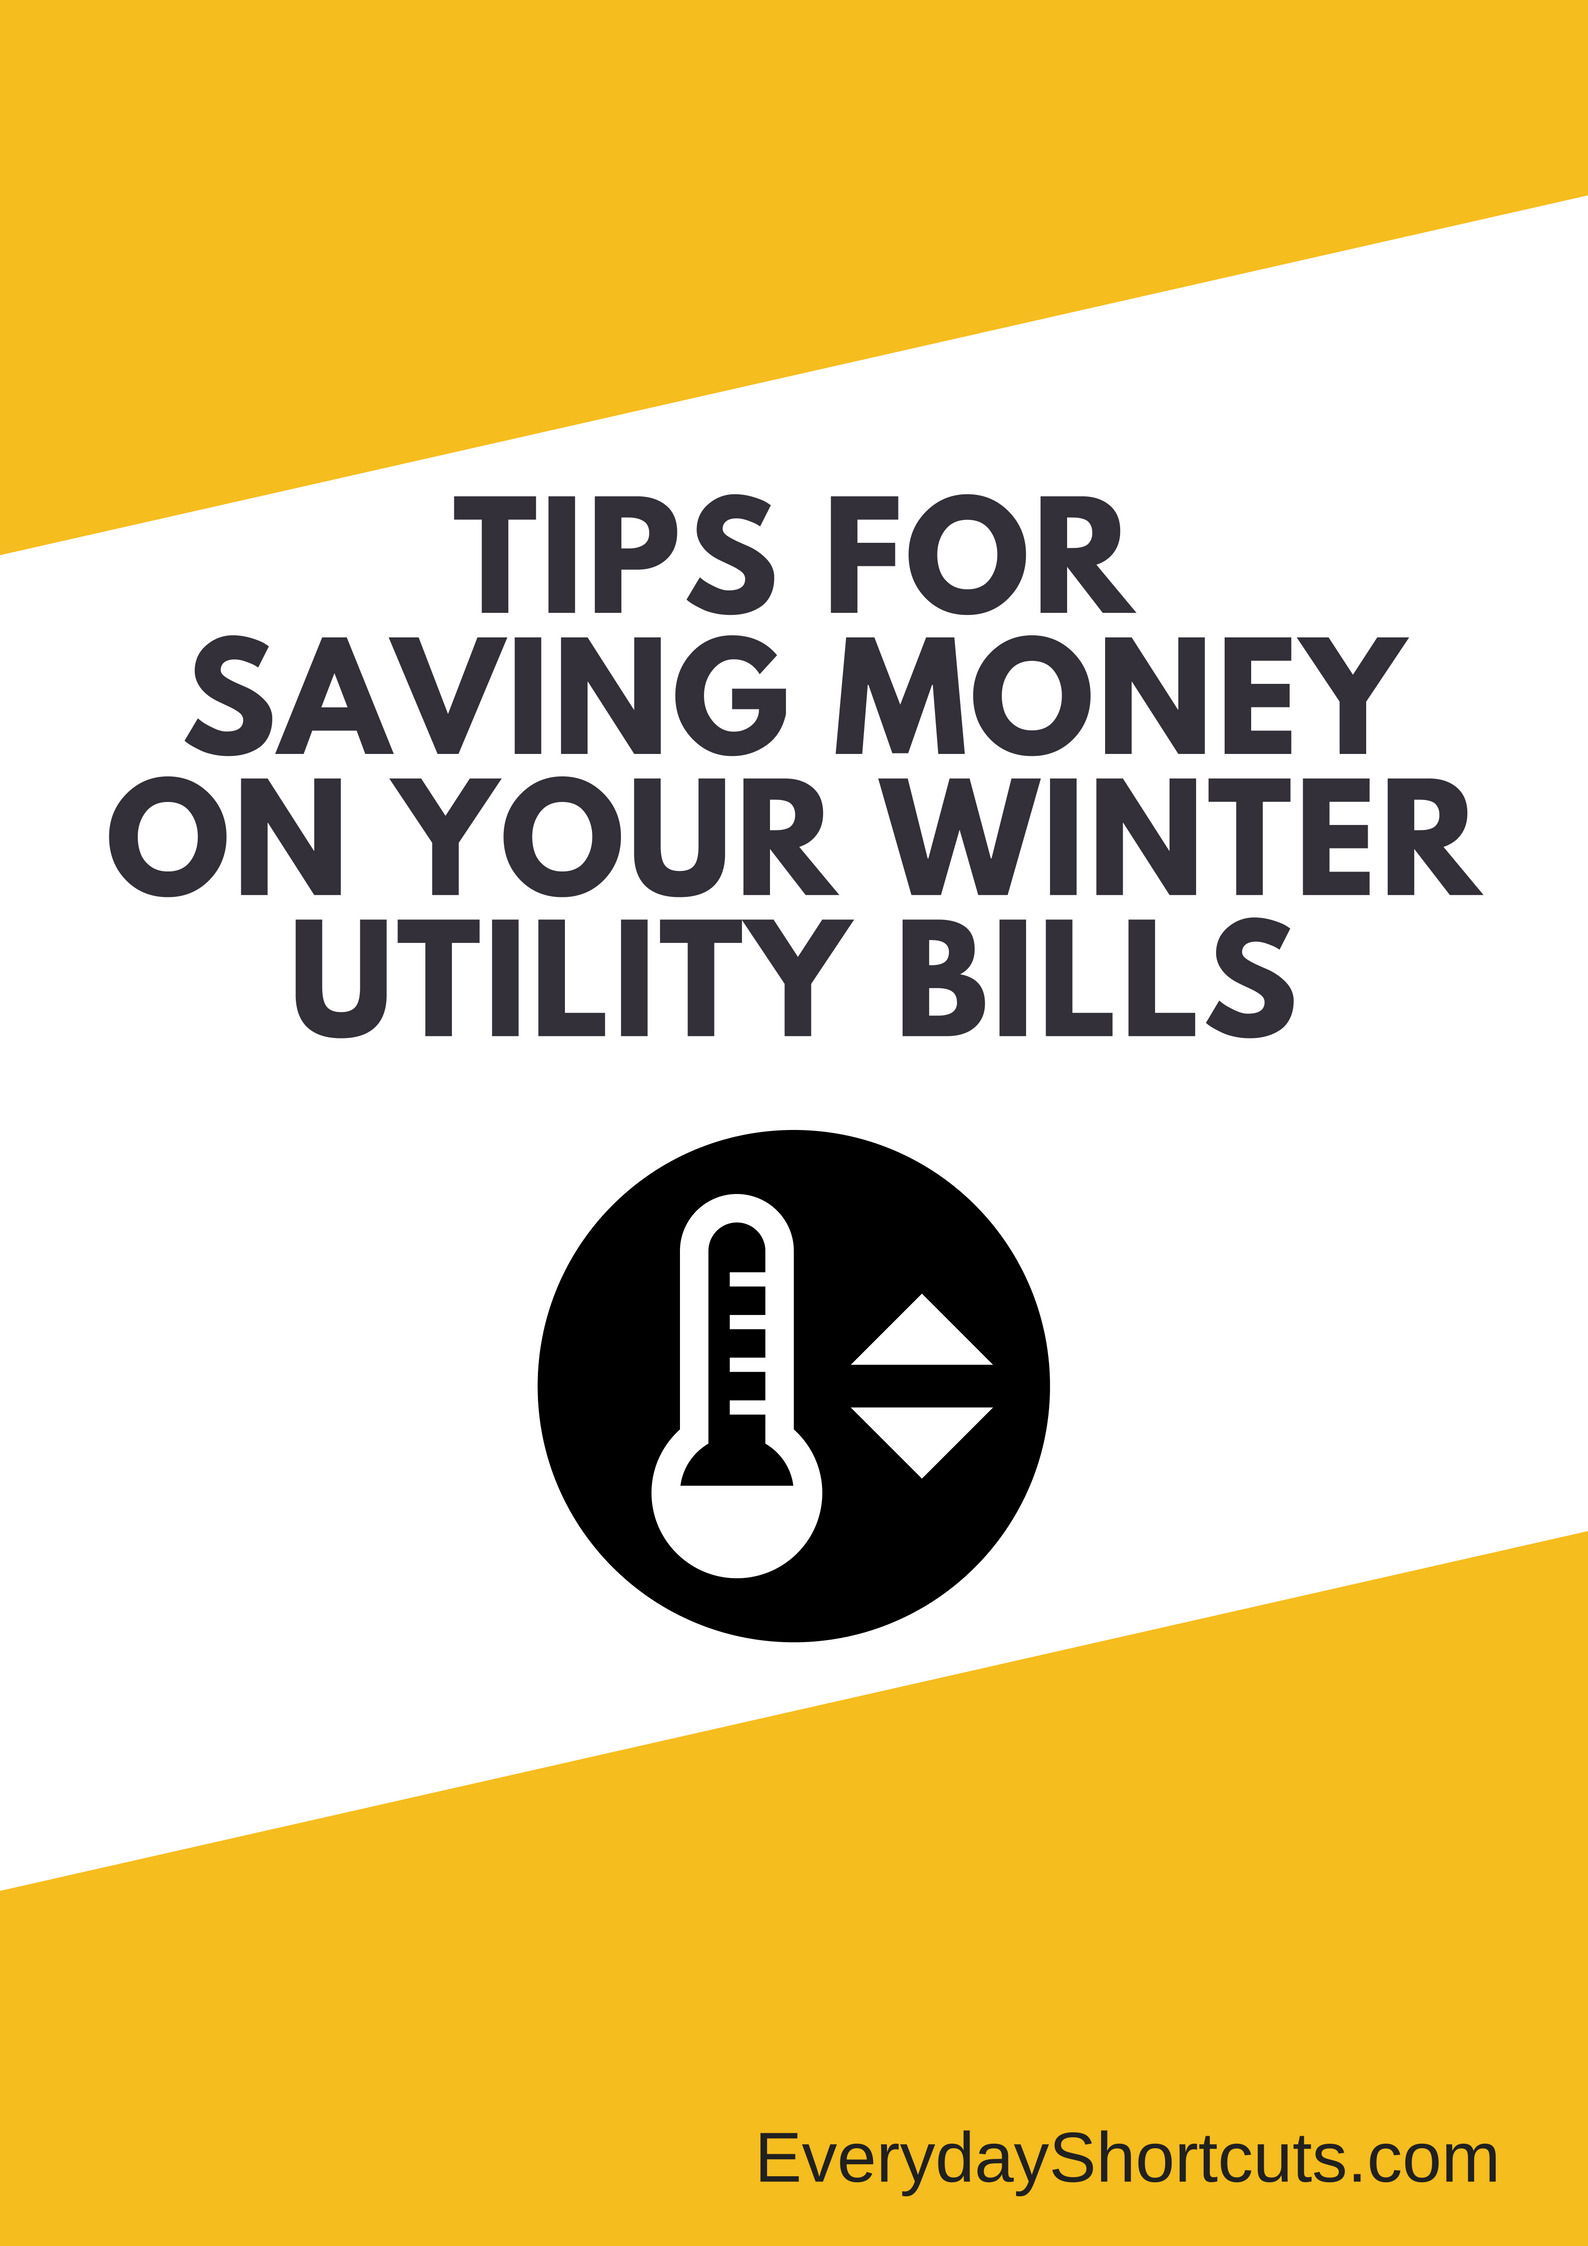 Tips to Saving Money on Your Winter Utility Bills